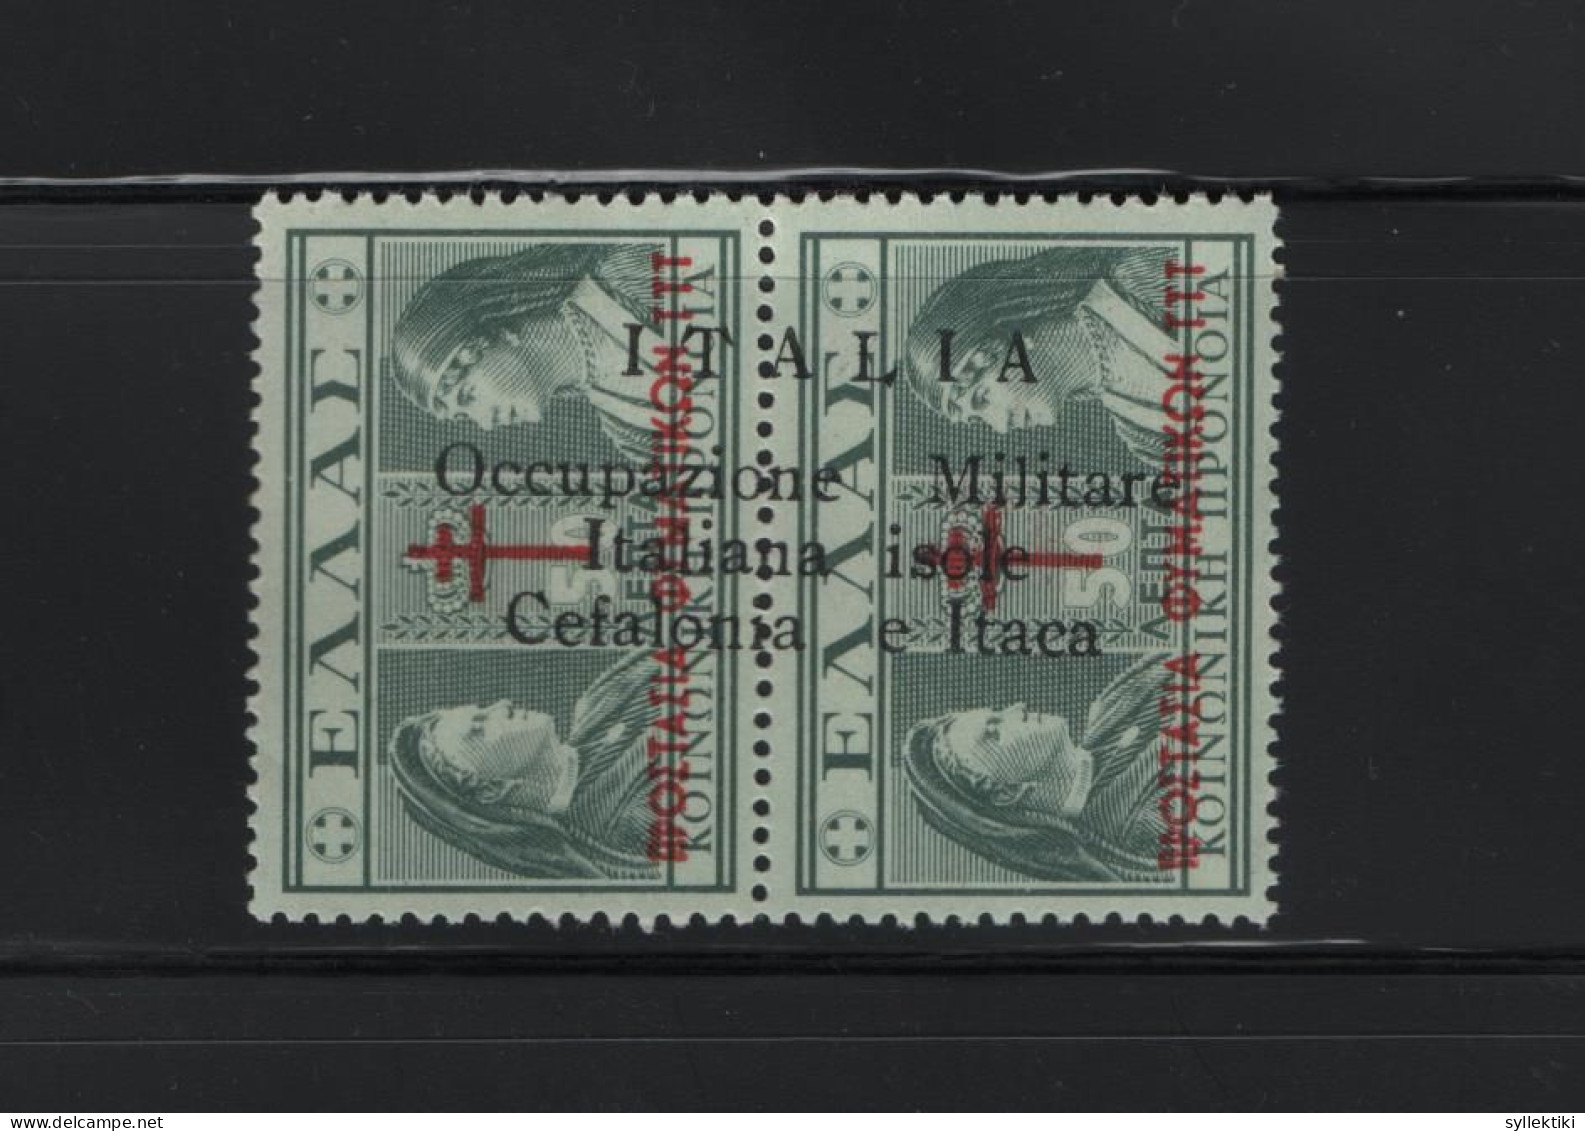 GREECE IONIAN ISLANDS 1941 50+50 LEPTA CHARITY ISSUE (ANTI TB) PAIR MNH STAMPS OVERPRINTED ITALIA Occupazione Militare I - Isole Ioniche